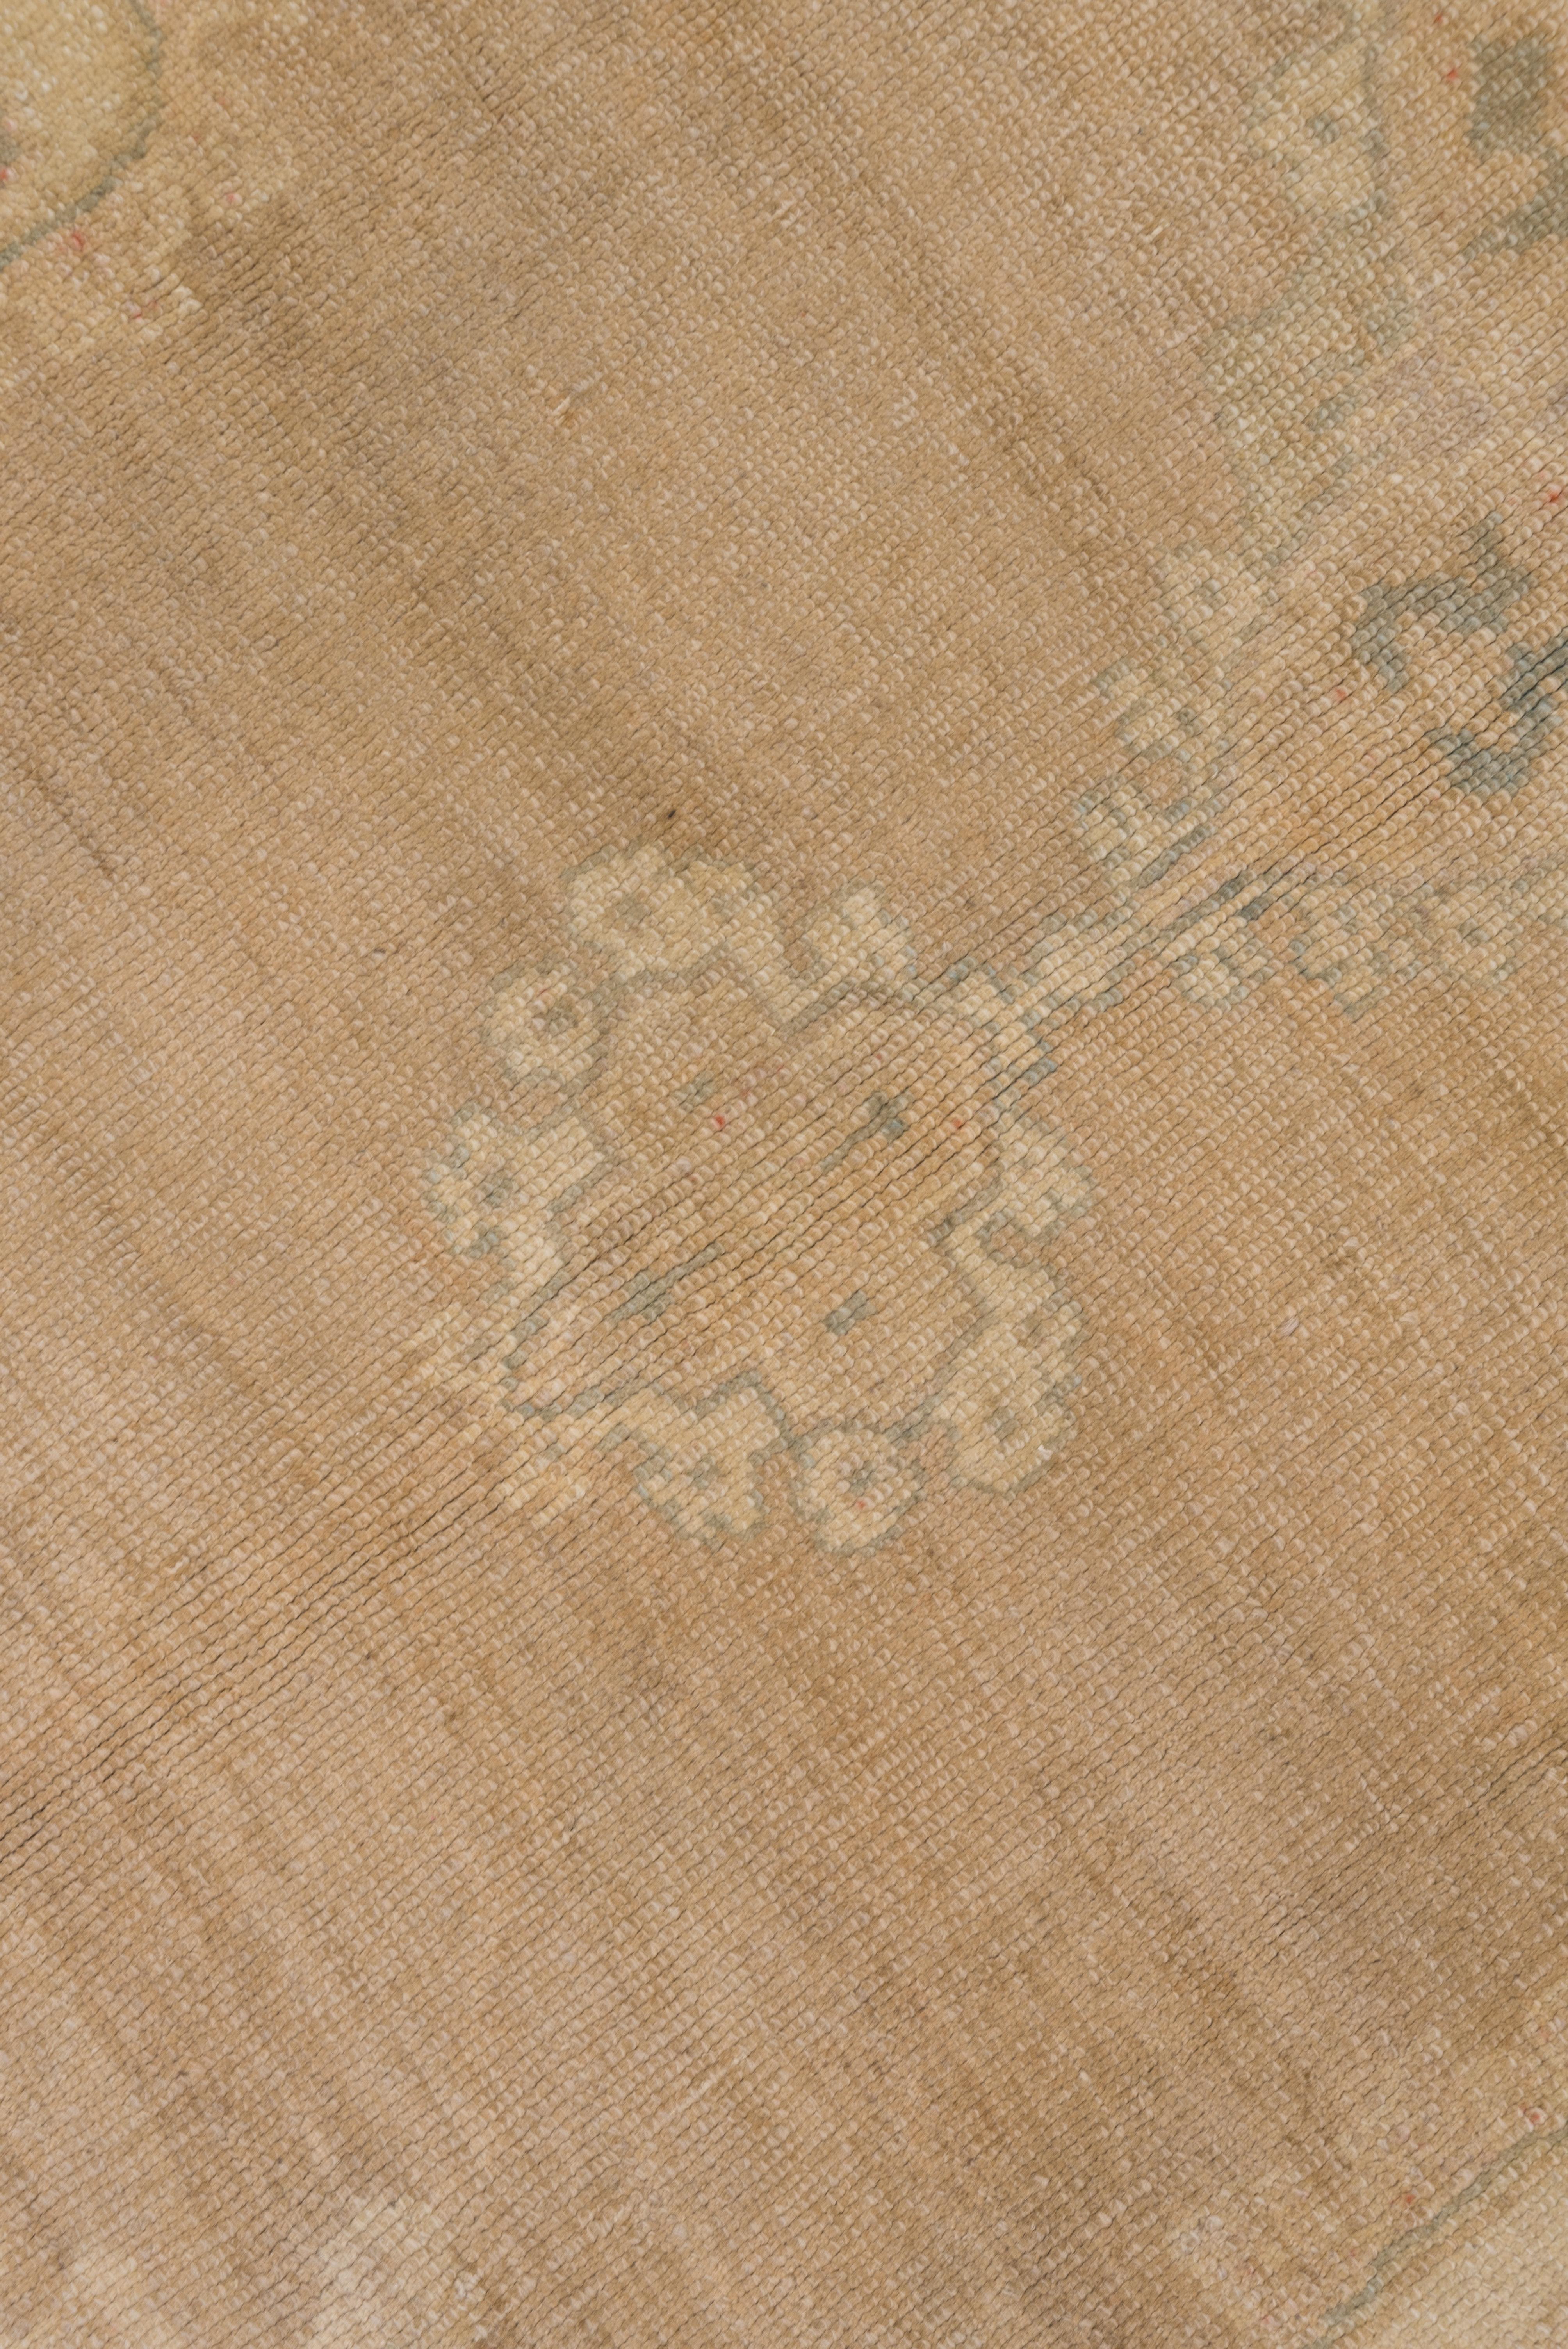 A pointed and pendanted oval sand medallion is set on the open beige field within dandy corners enclosing flowers. The rust brown main border shows stencil simple palmettes and a voluted vine with light green accents. At each field end is a